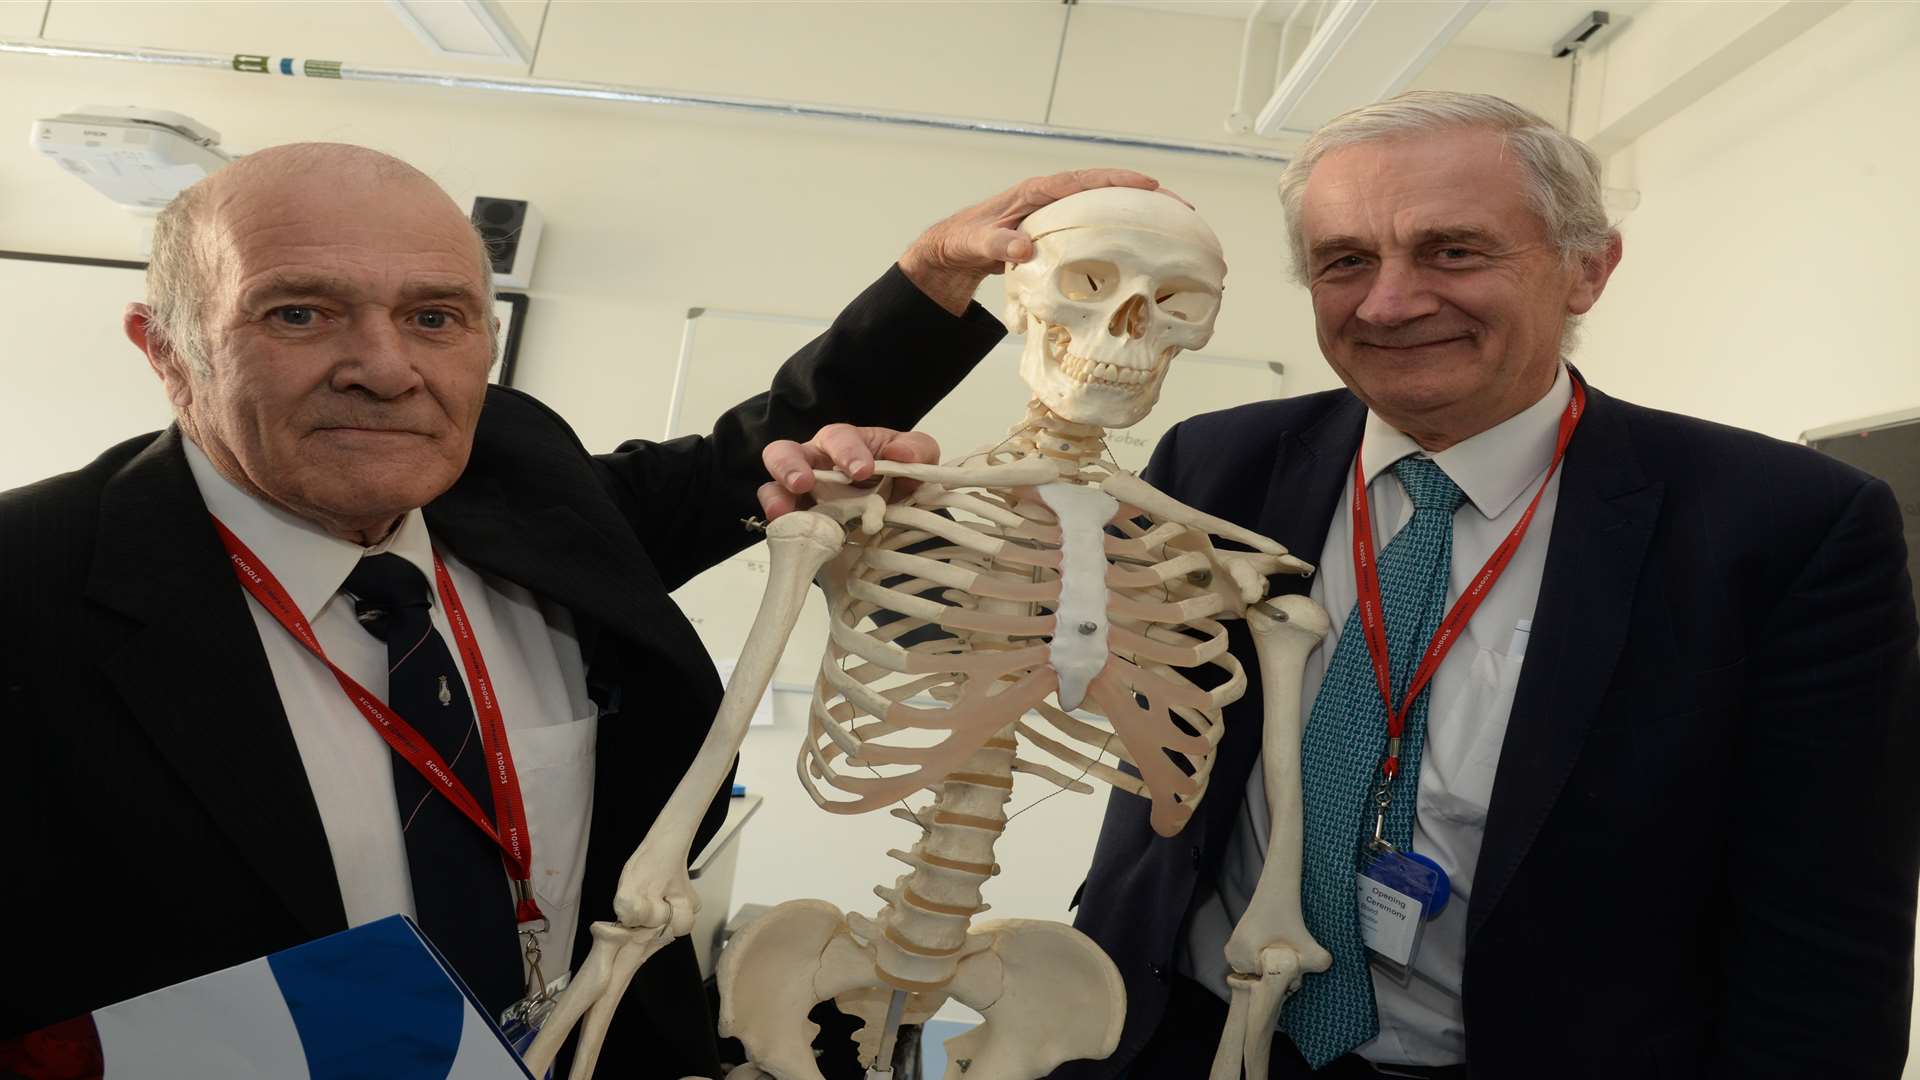 Councillors Wayne Elliott and Trevor Bond meet one of the residents in the science lab